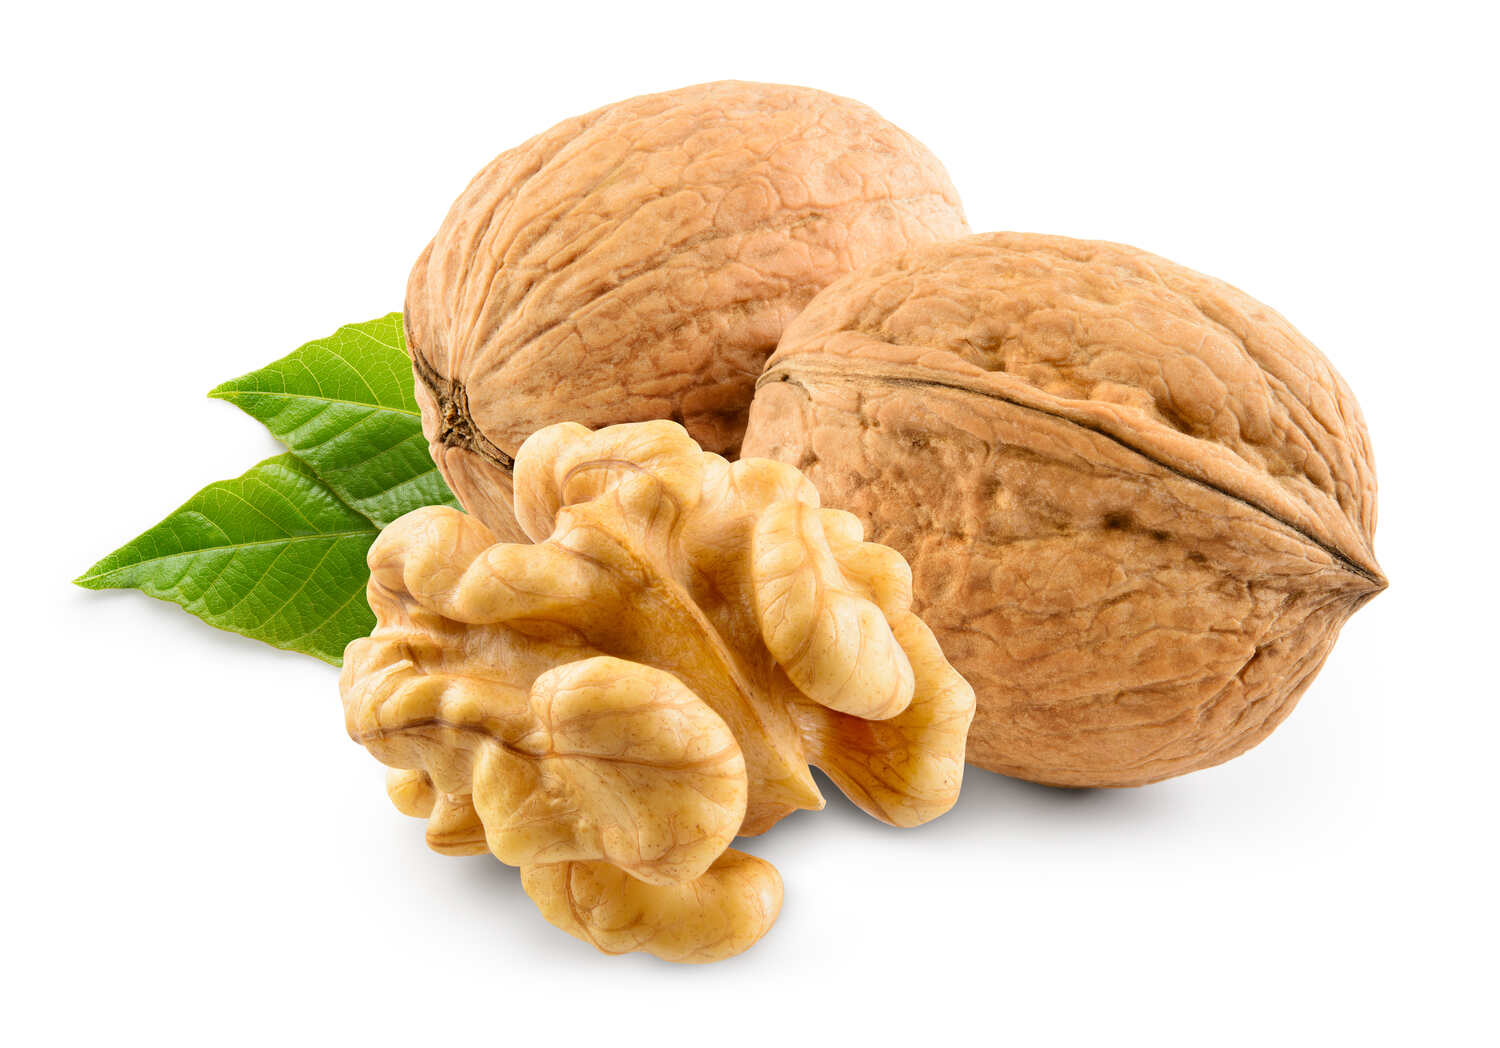 Nutritional Benefits Of Walnuts